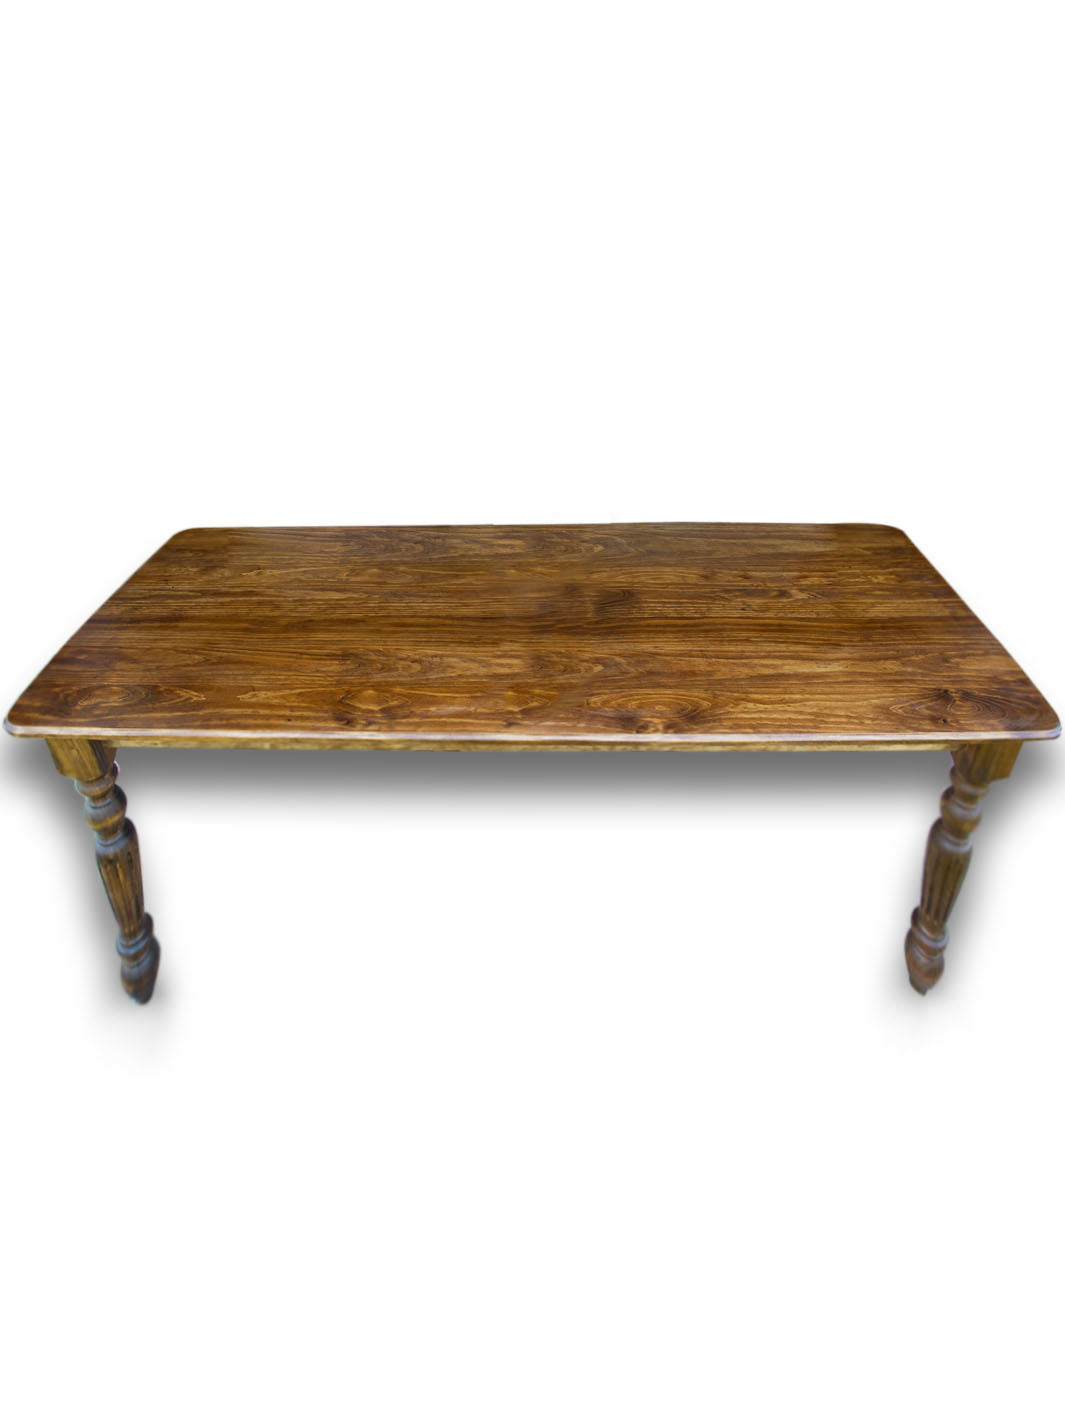 Farmhouse Dining Table with Stained Top and Turned Legs Earthly Comfort Dining Tables 979